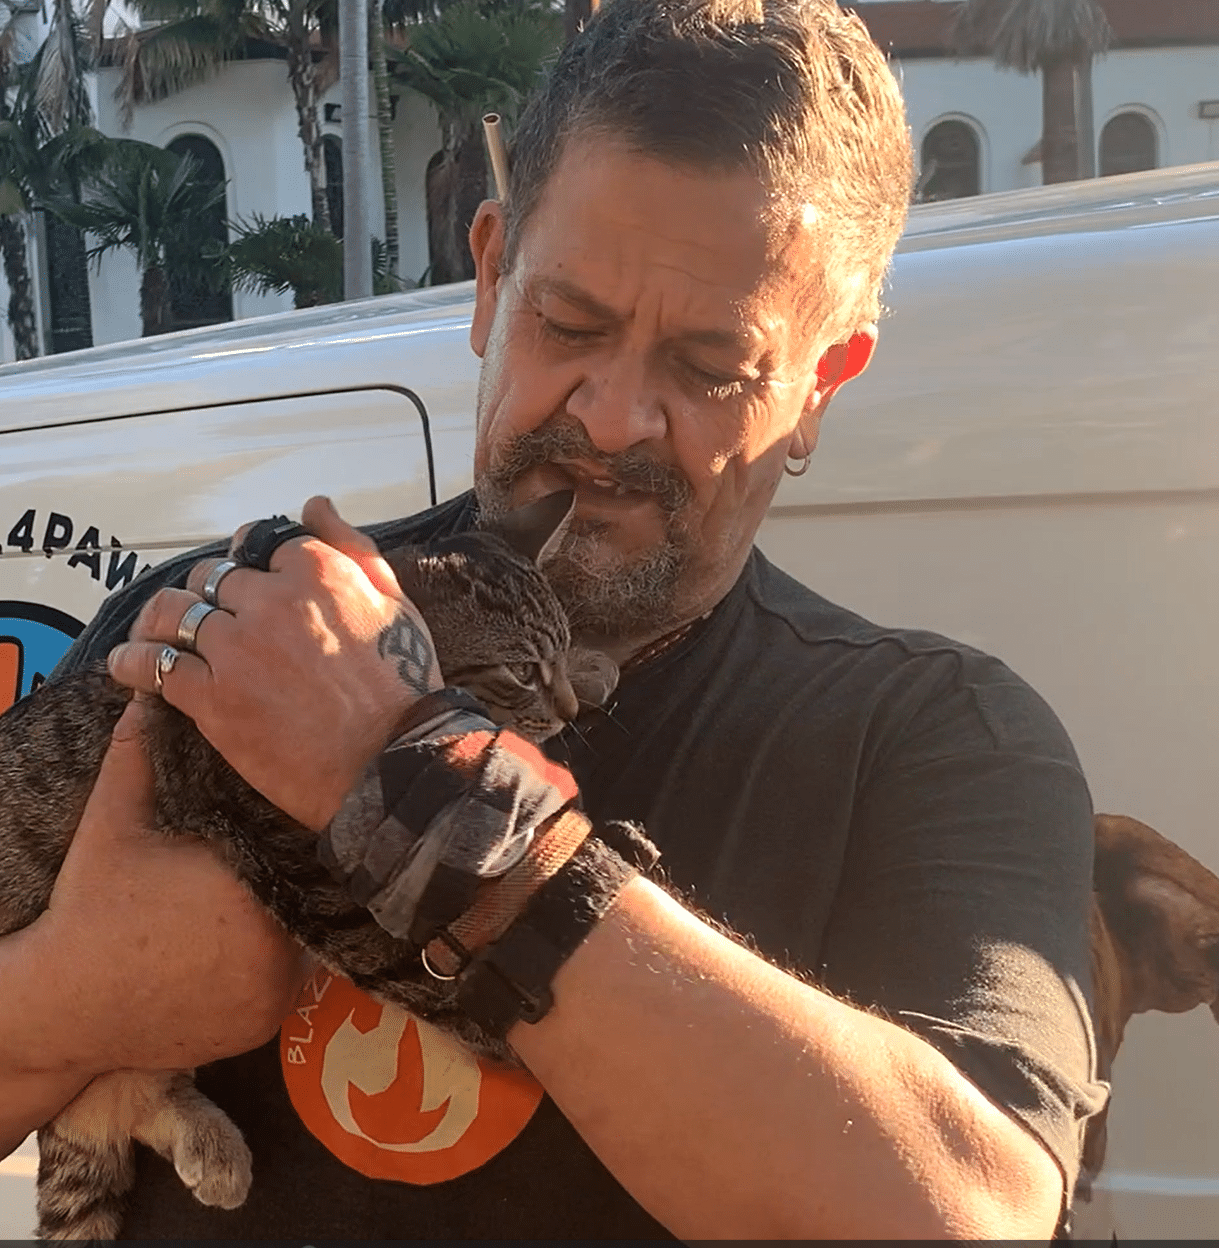 Man with his pet at a C.A.R.E.4Paws Mobile Clinic event